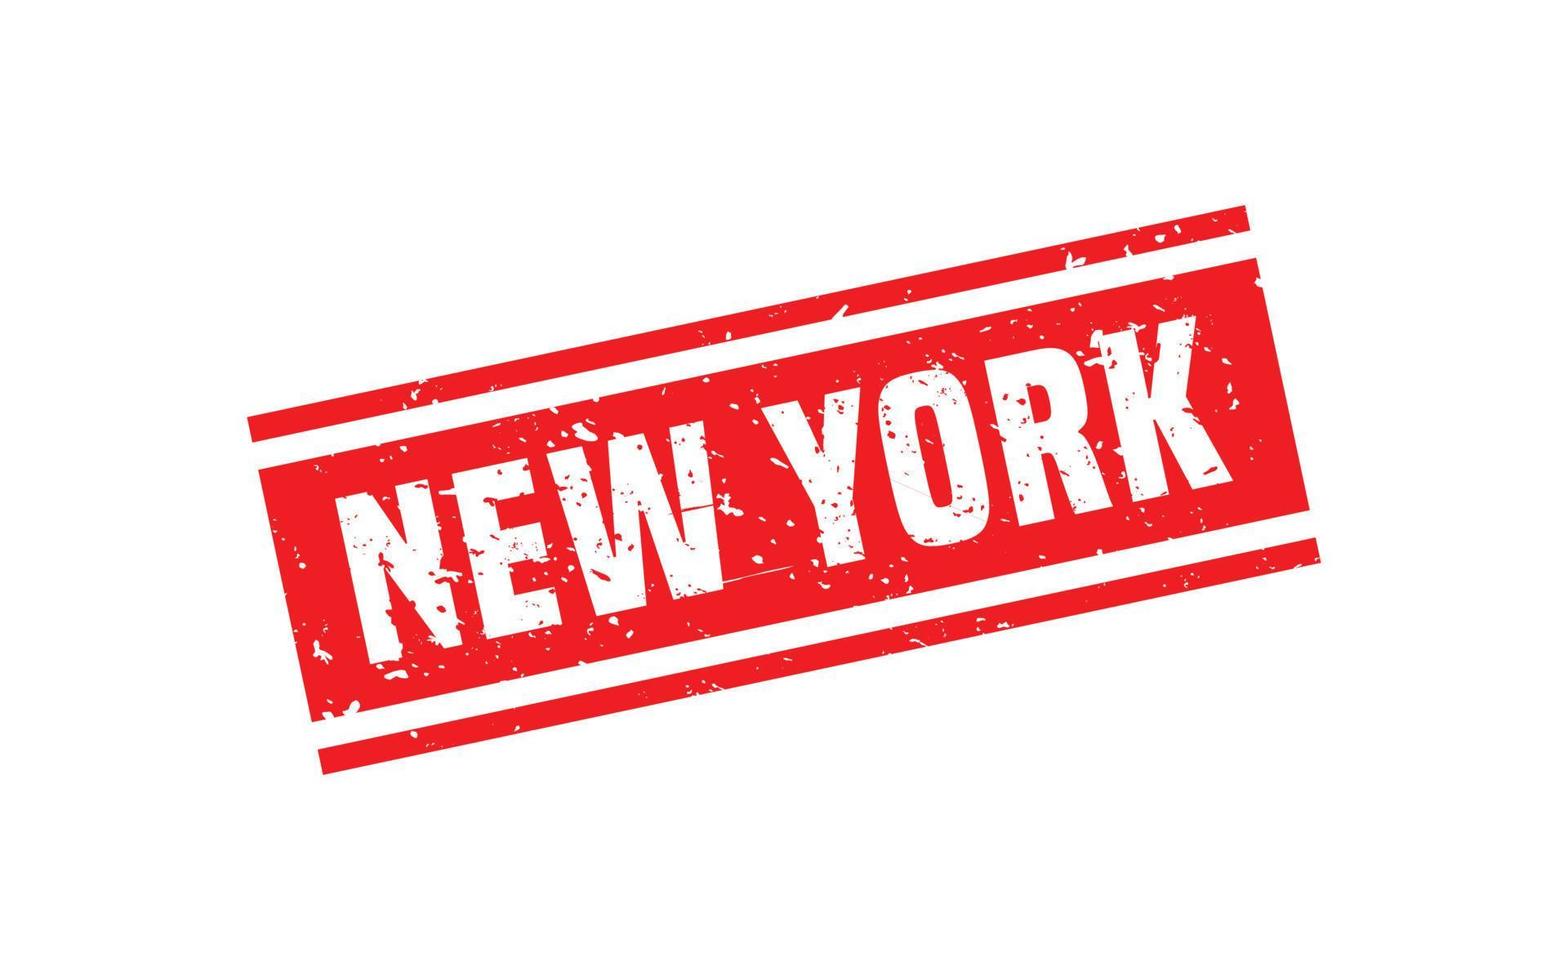 NEW YORK rubber stamp texture with grunge style on white background vector